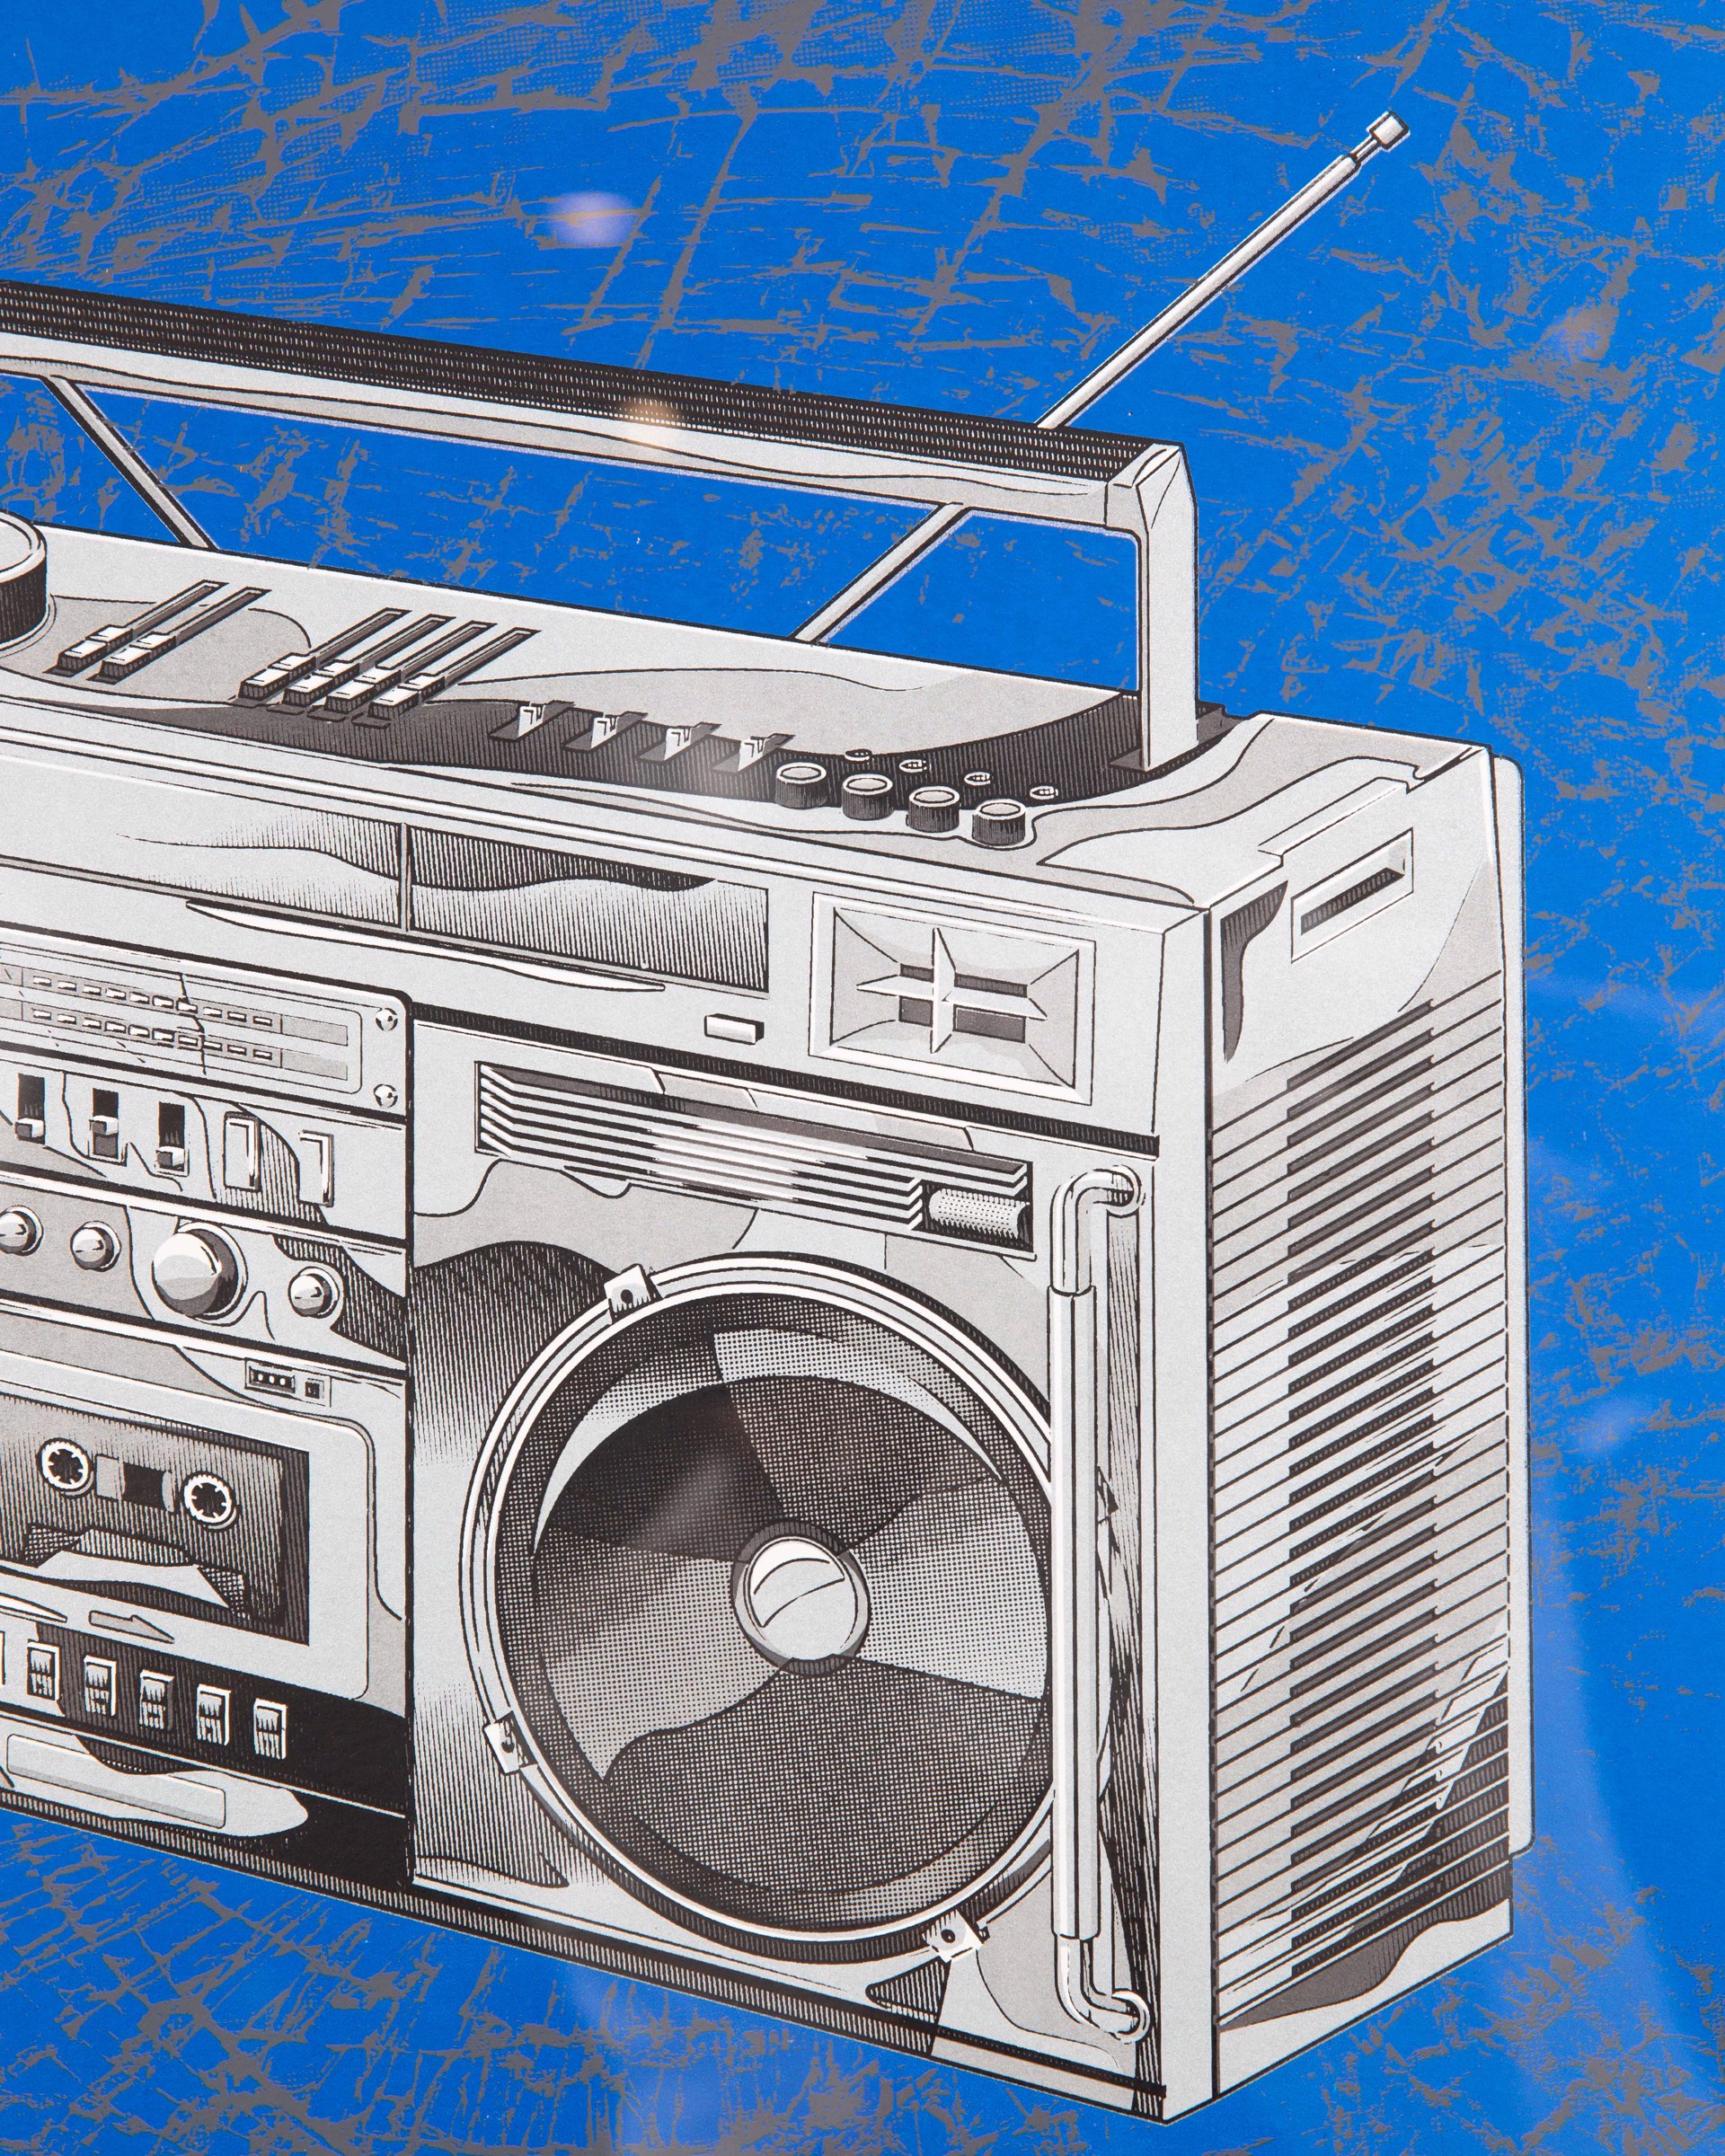 Cobalt Blue Box by Lyle Owerko | Boomboxes